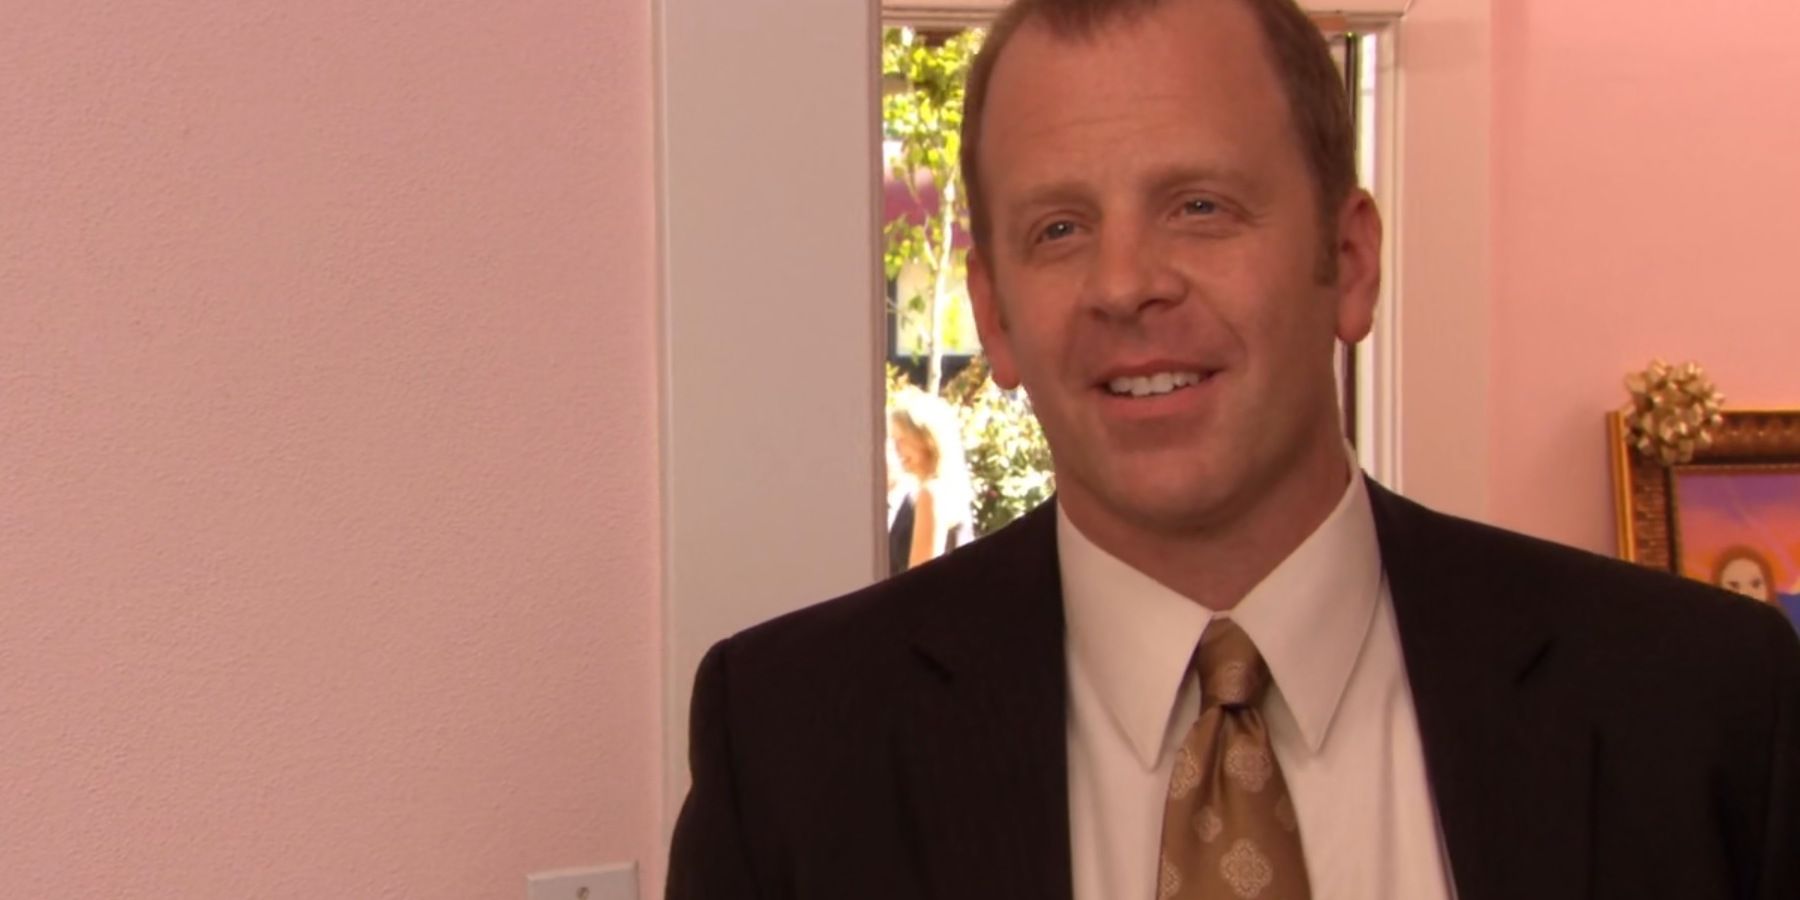 The Office Toby was excited to hear Jim and Pam were missing from the wedding